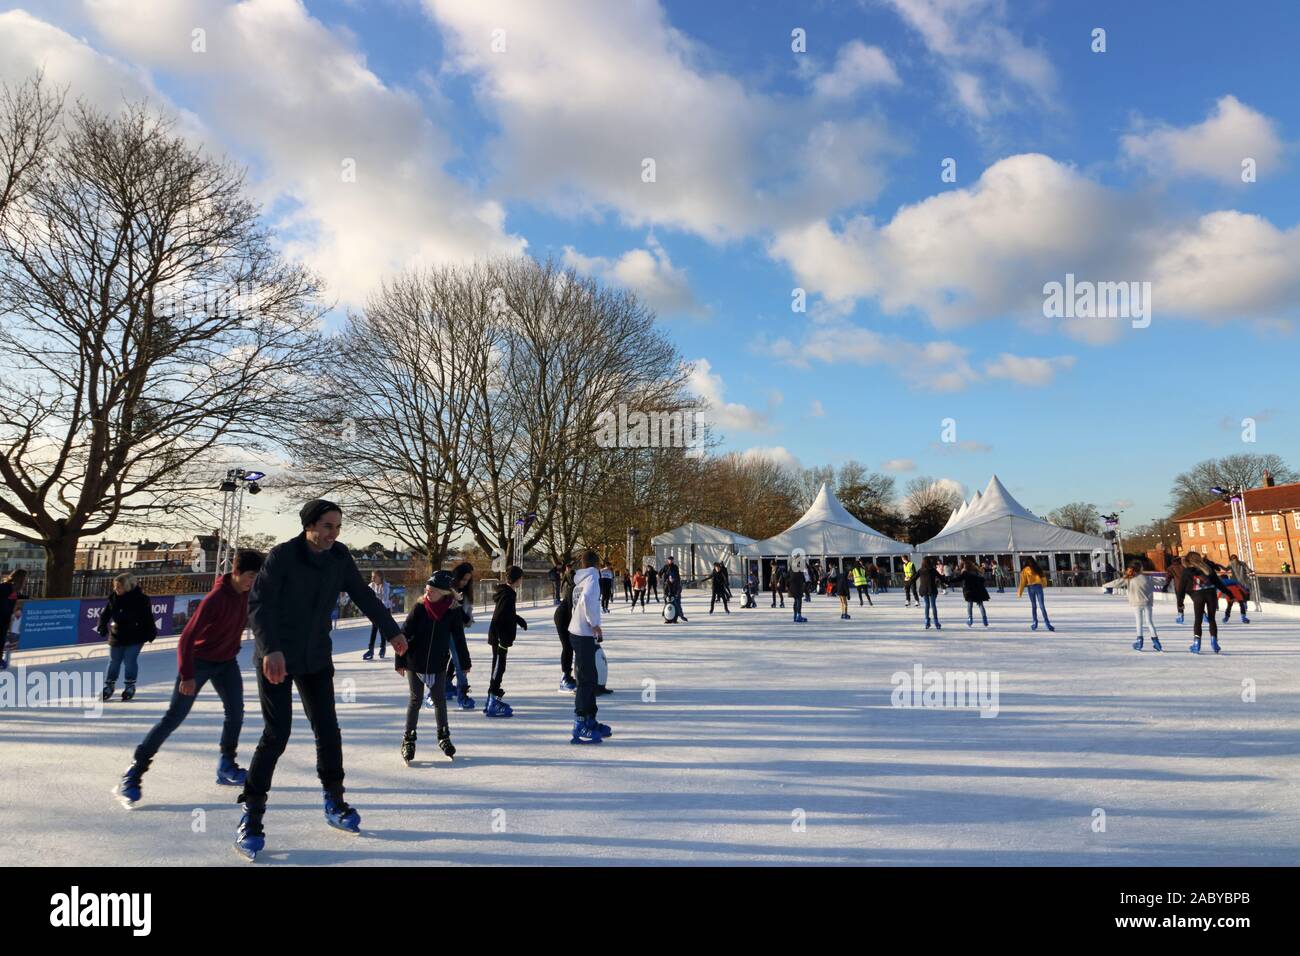 Hampton Court, SW London, UK. 29th Nov, 2019. In the build up to the festive period, the ice rink is up and running at Hampton Court Palace in South West London, England. On a bright but chilly day the skaters had fun on the ice. Credit: Julia Gavin/Alamy Live News Stock Photo